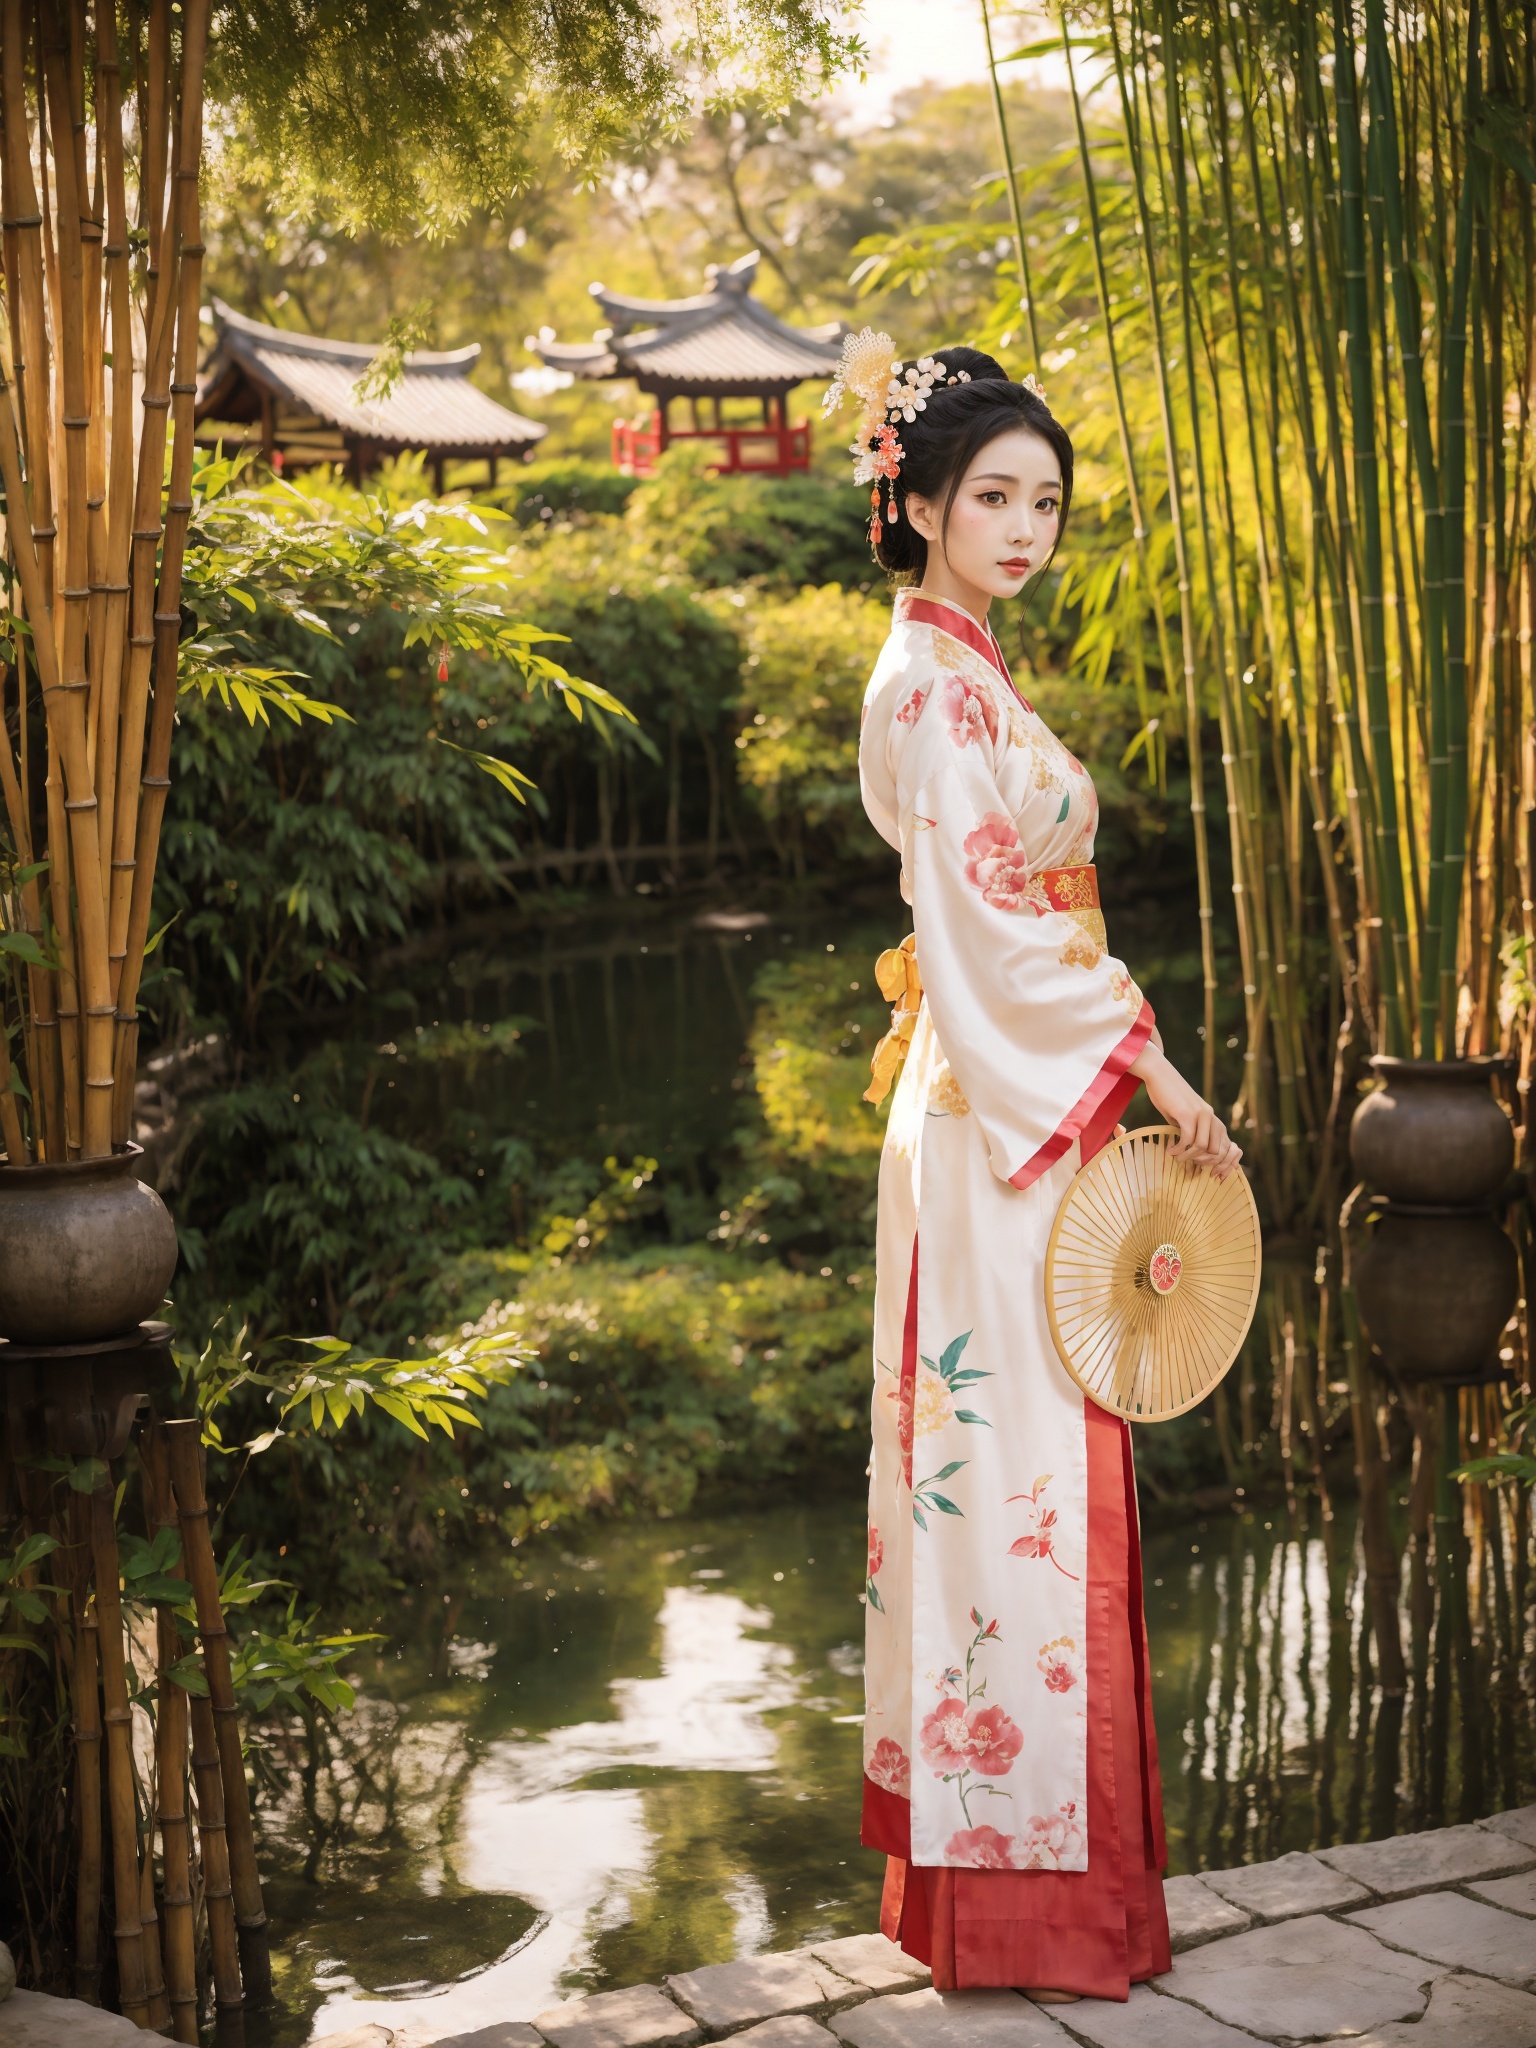 The image showcases a woman dressed in a traditional,possibly ancient,Chinese attire. She is adorned with a floral hairpiece and holds a circular fan with painted designs. The woman stands amidst a serene garden,surrounded by bamboo trees and a calm body of water. The setting sun casts a warm,golden hue over the scene,enhancing the tranquility of the moment.,